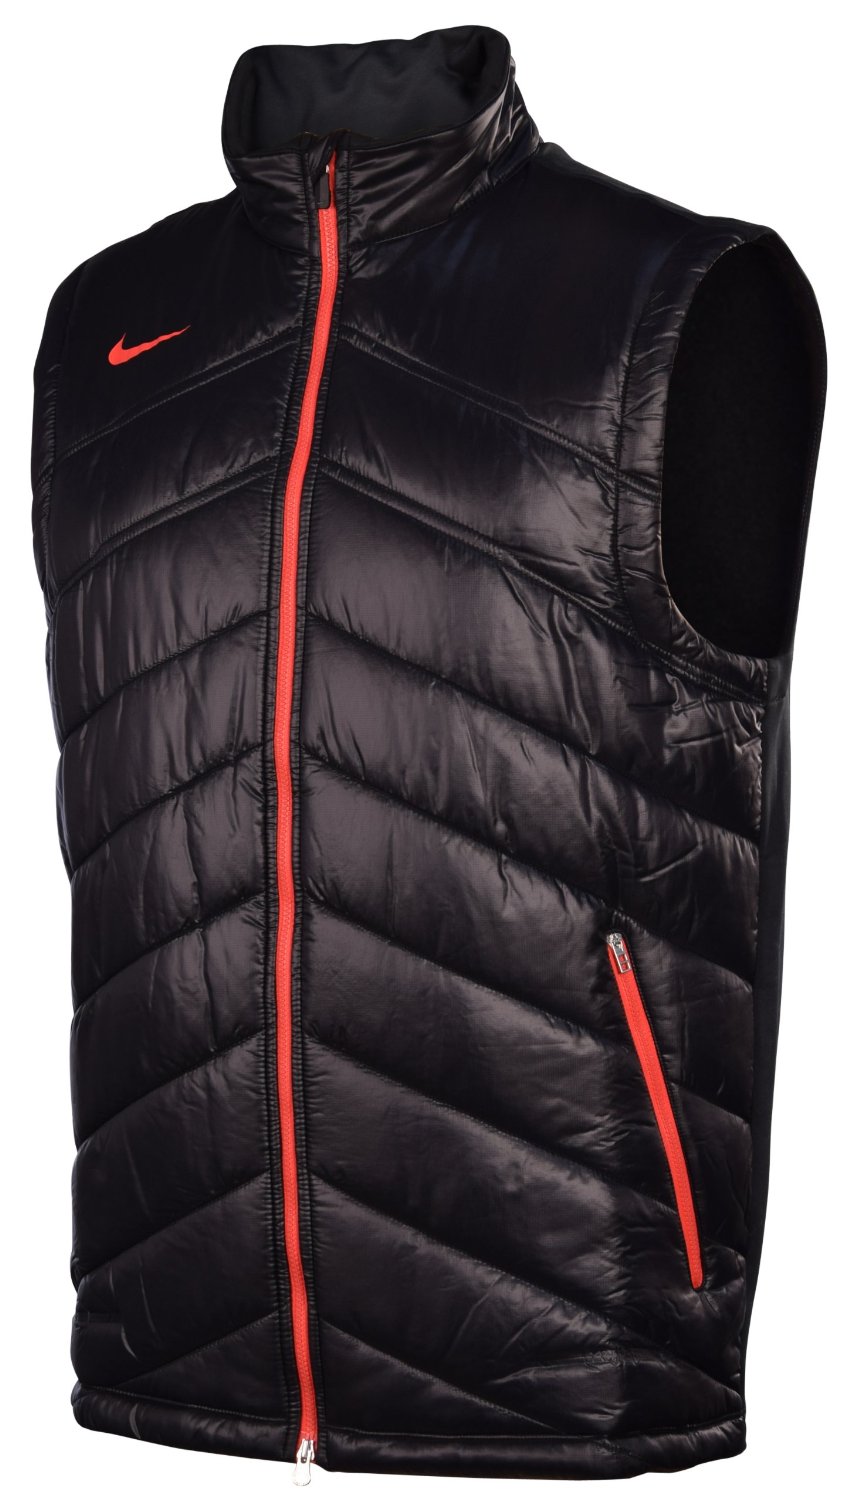 Nike Thermal Mapping Golf Vests